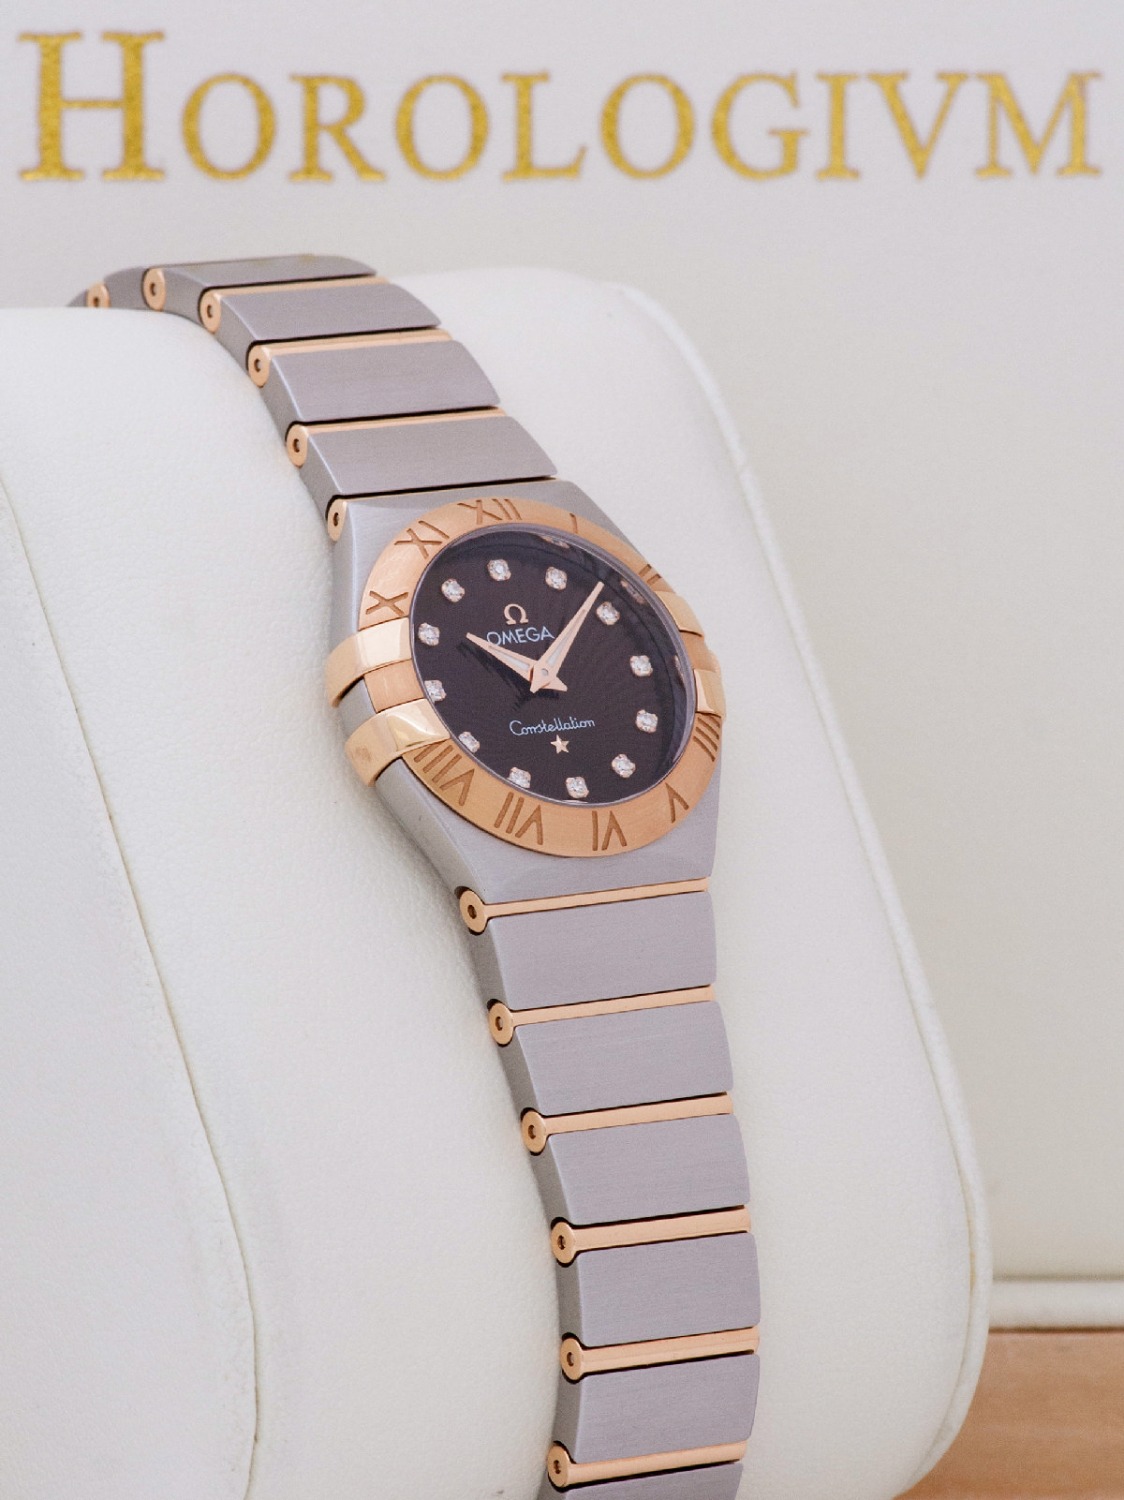 Omega Constellation Quartz Two-Tone 27MM watch, two - tone (bi - colored) silver and rose gold